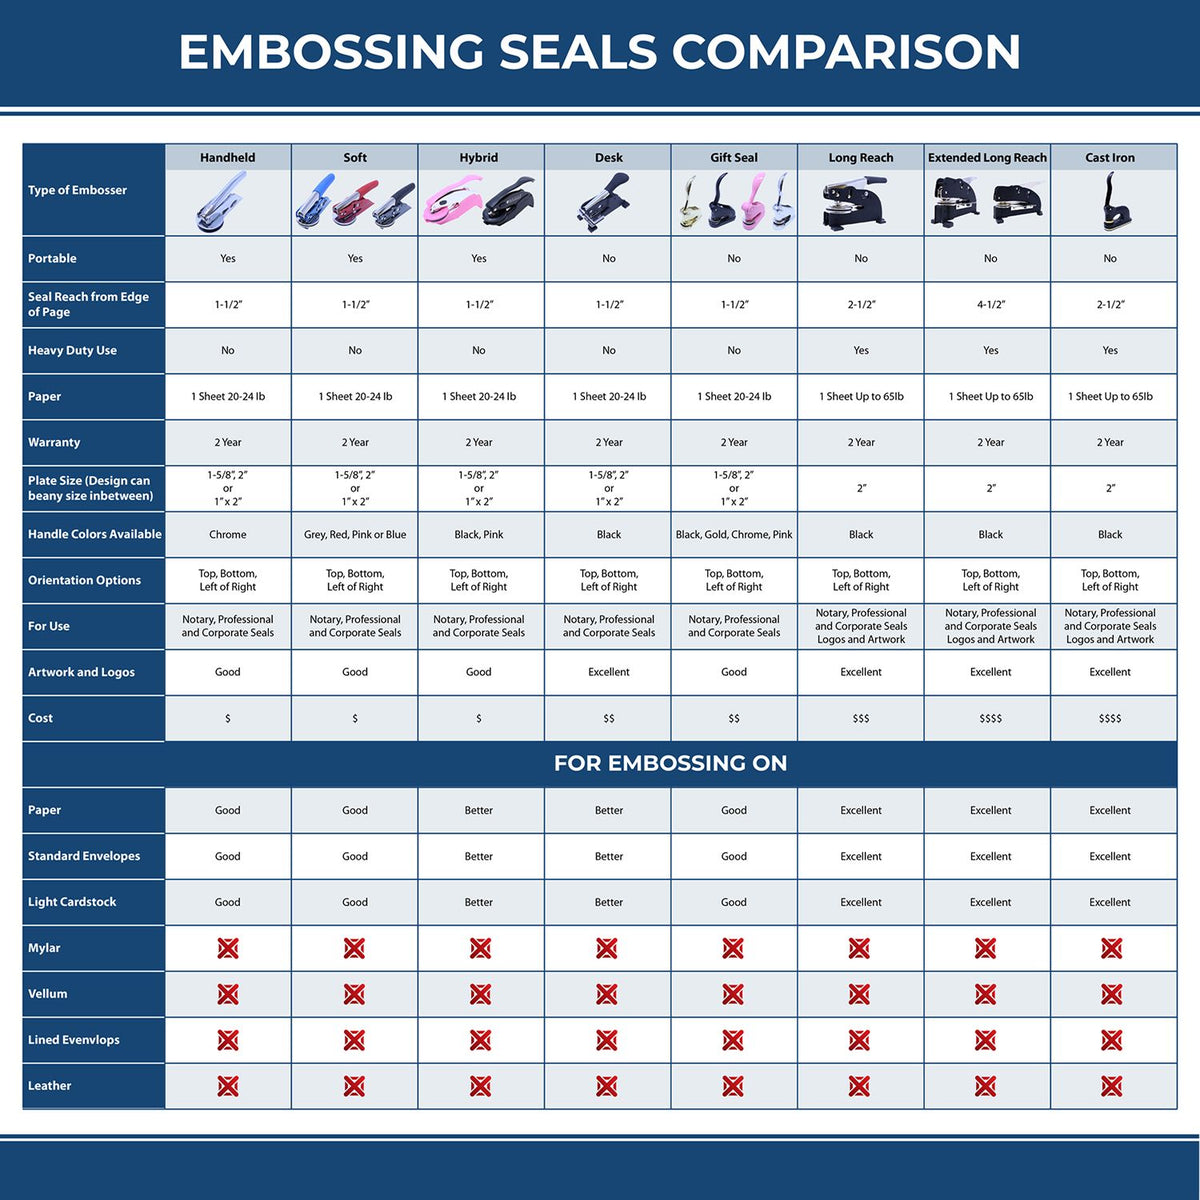 A comparison chart for the different types of mount models available for the Hybrid Wyoming Engineer Seal